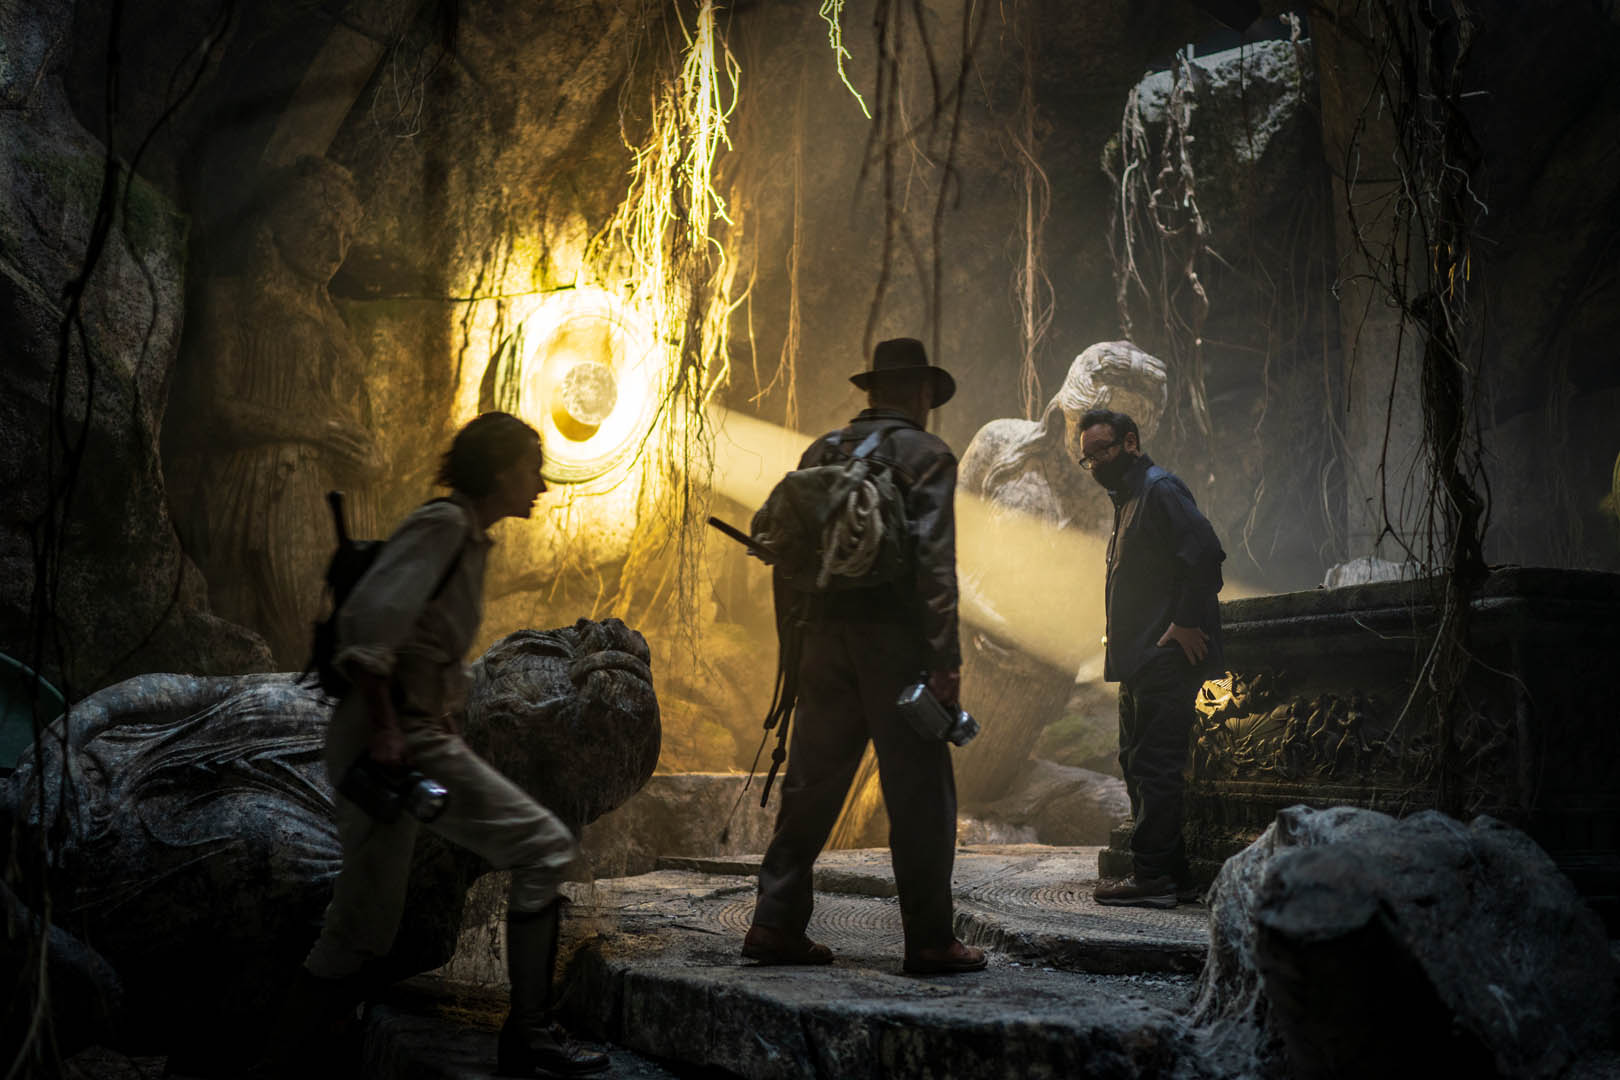 Behind the scenes of Indy and Helena entering Archimedes’ Tomb